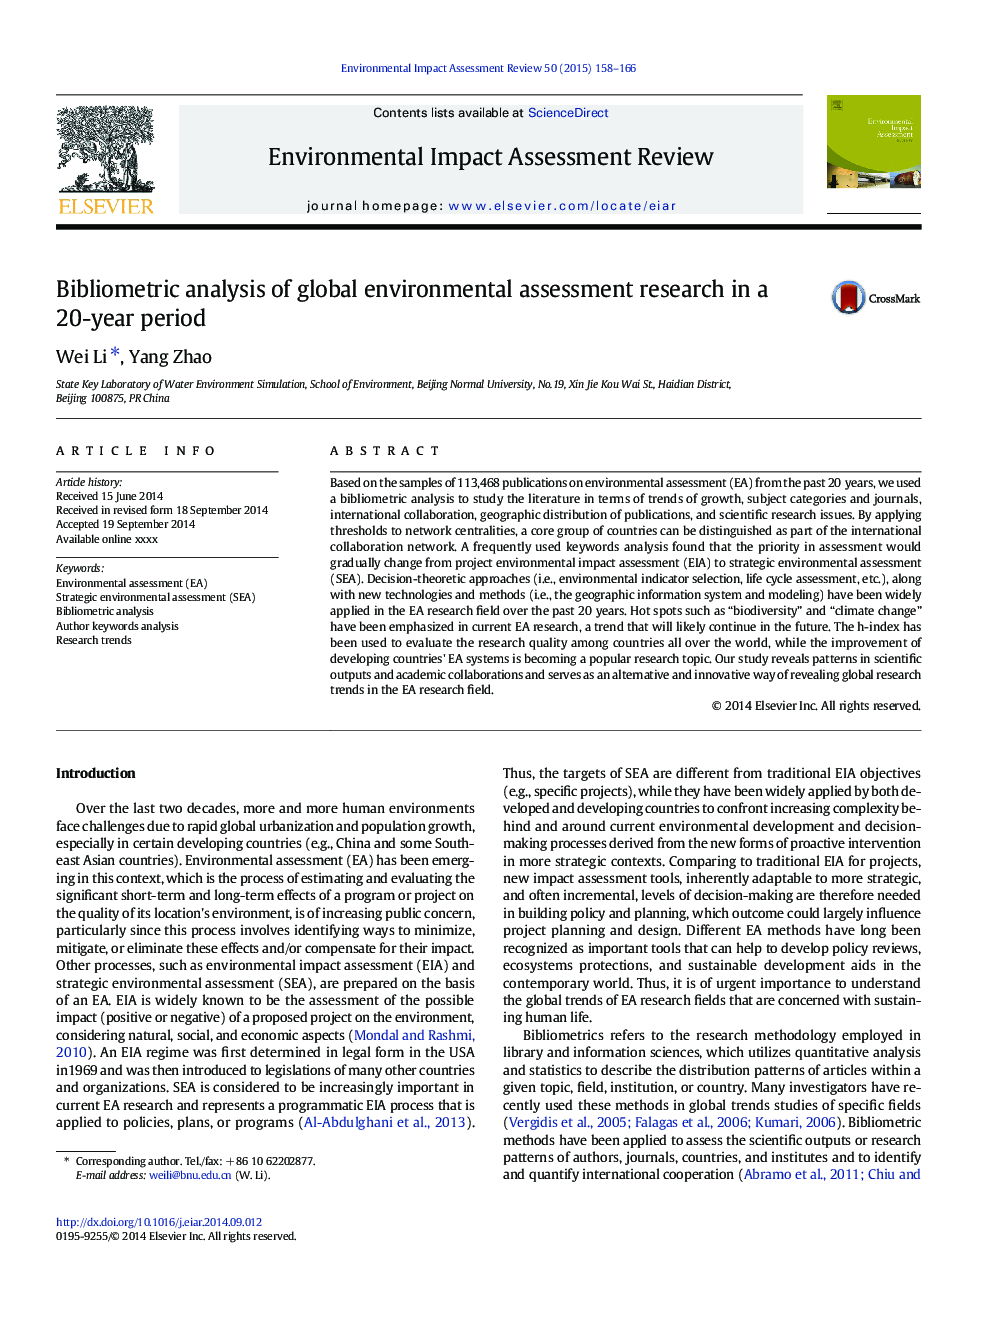 Bibliometric analysis of global environmental assessment research in a 20-year period